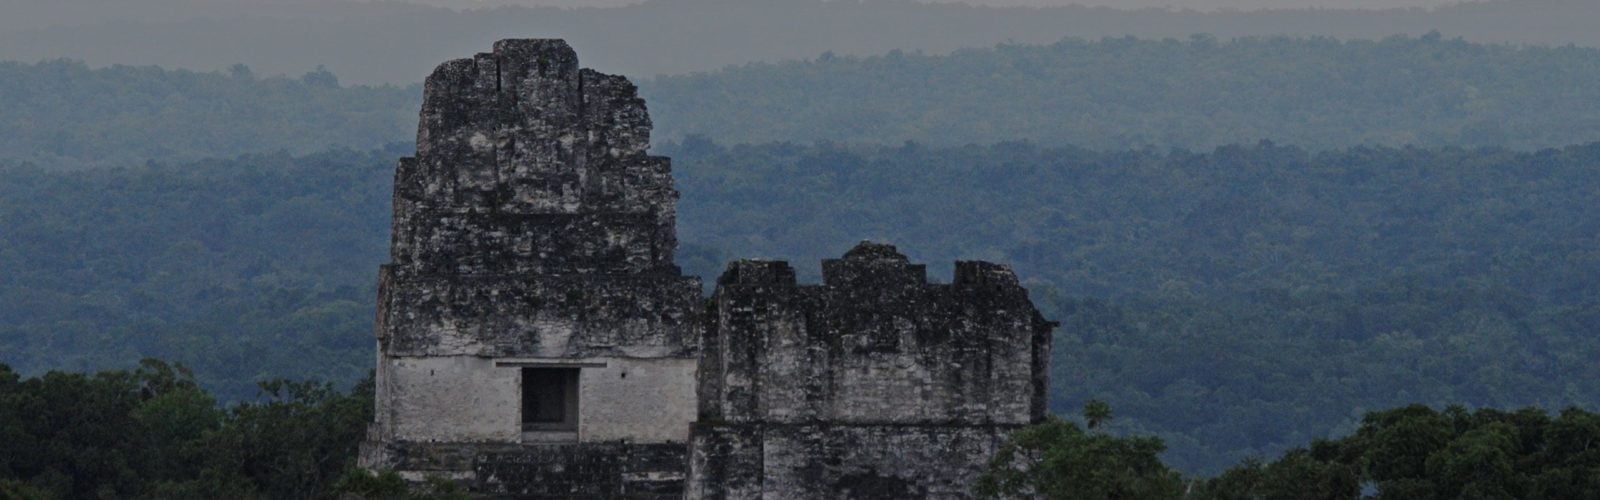 Mayan ruins of Tikal in Guatemala peeking through the forest canopy at sunset